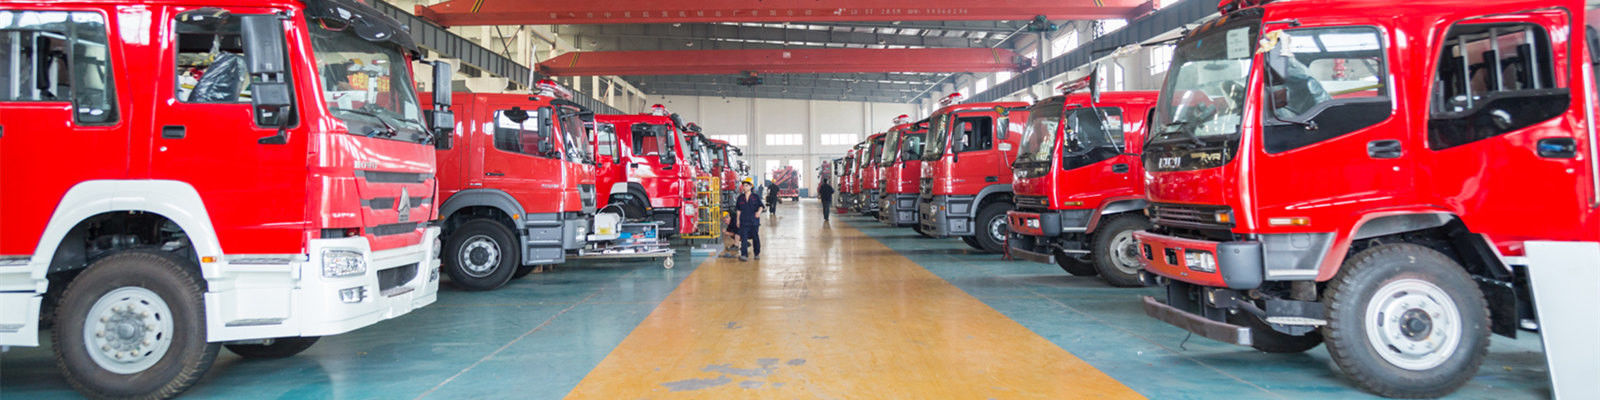 quality Commercial Fire Trucks factory